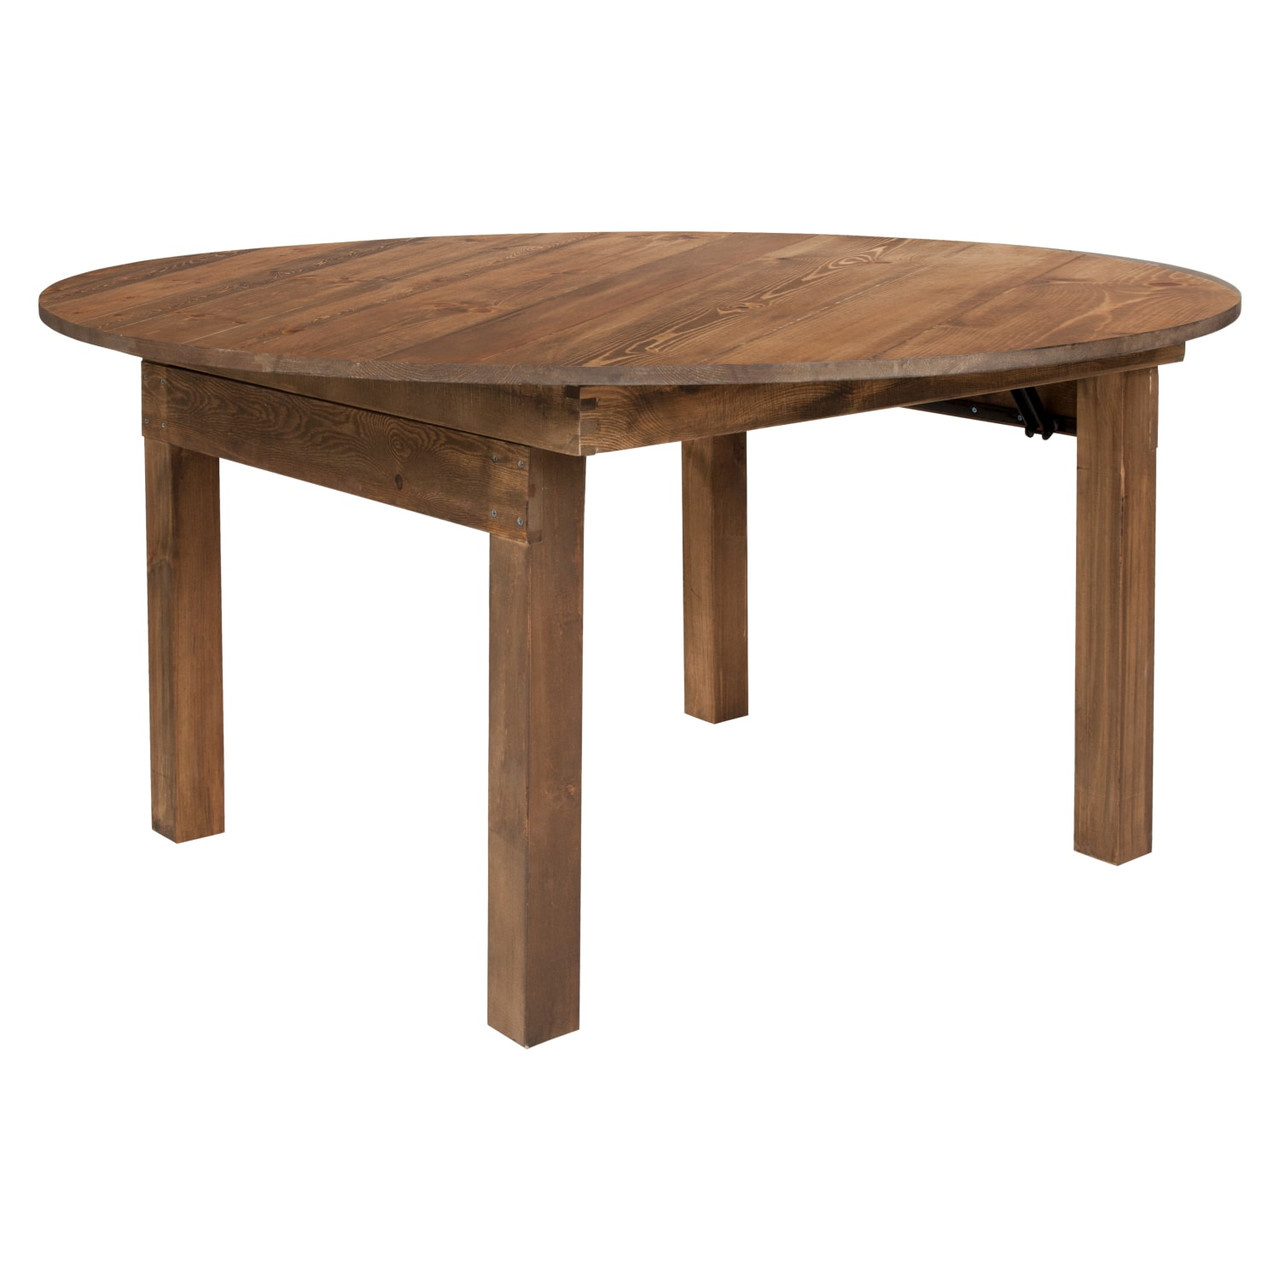 HERCULES Round Dining Table